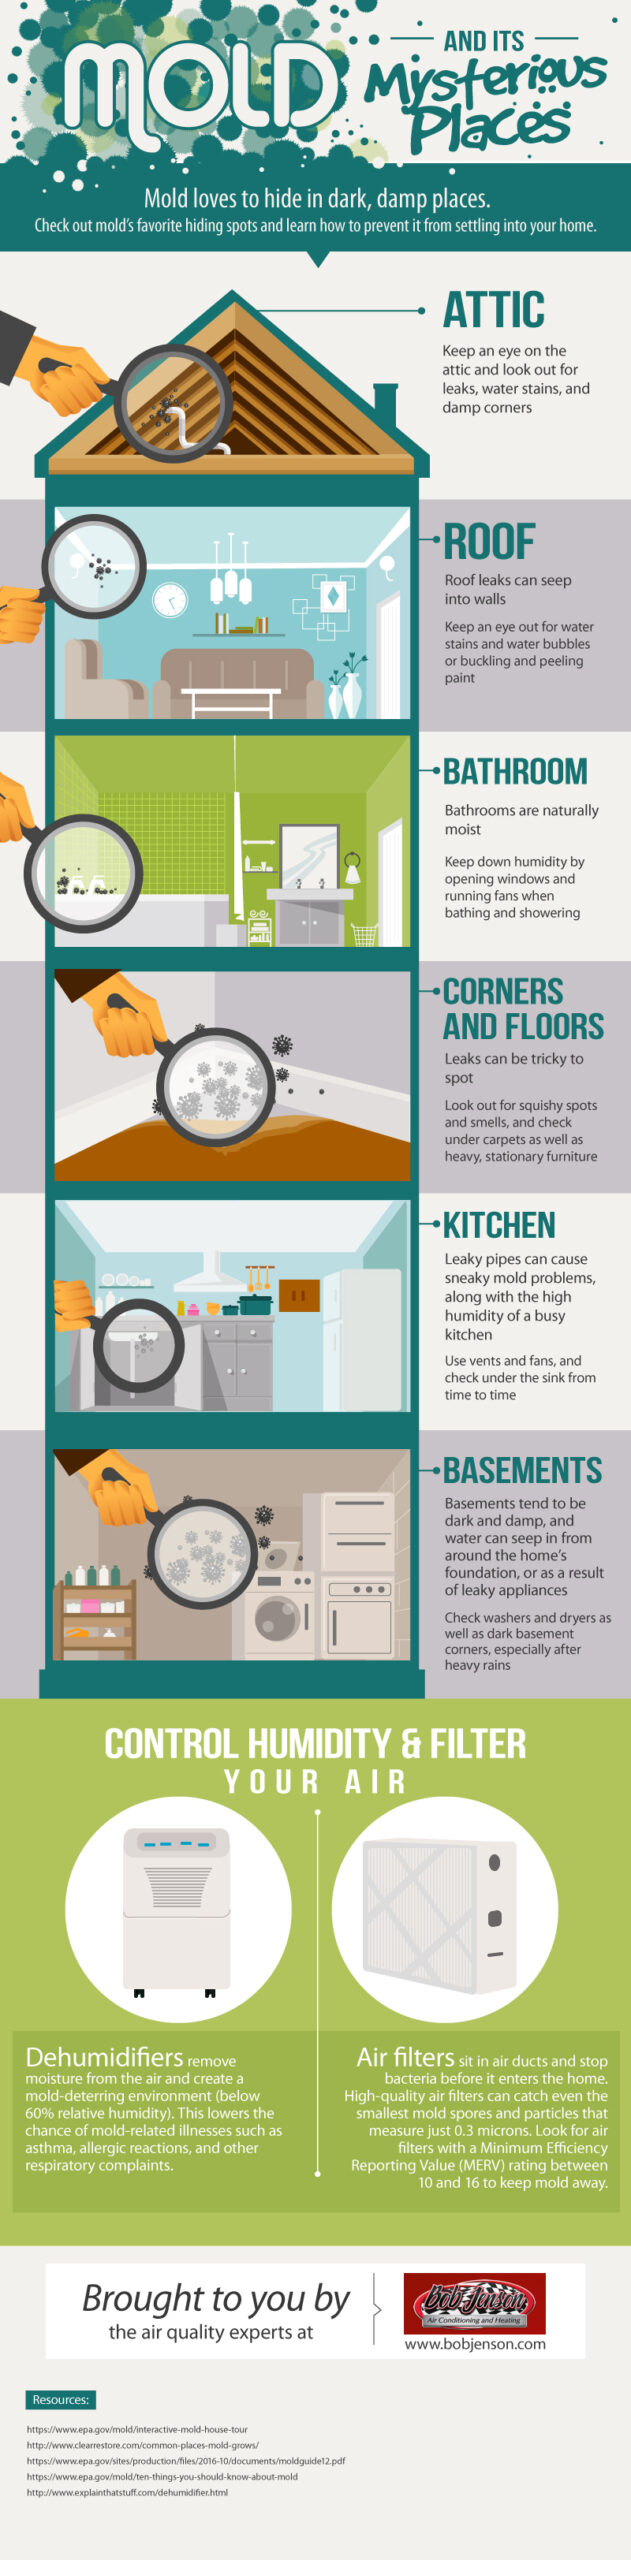 Places Where You Find Mold Infographic